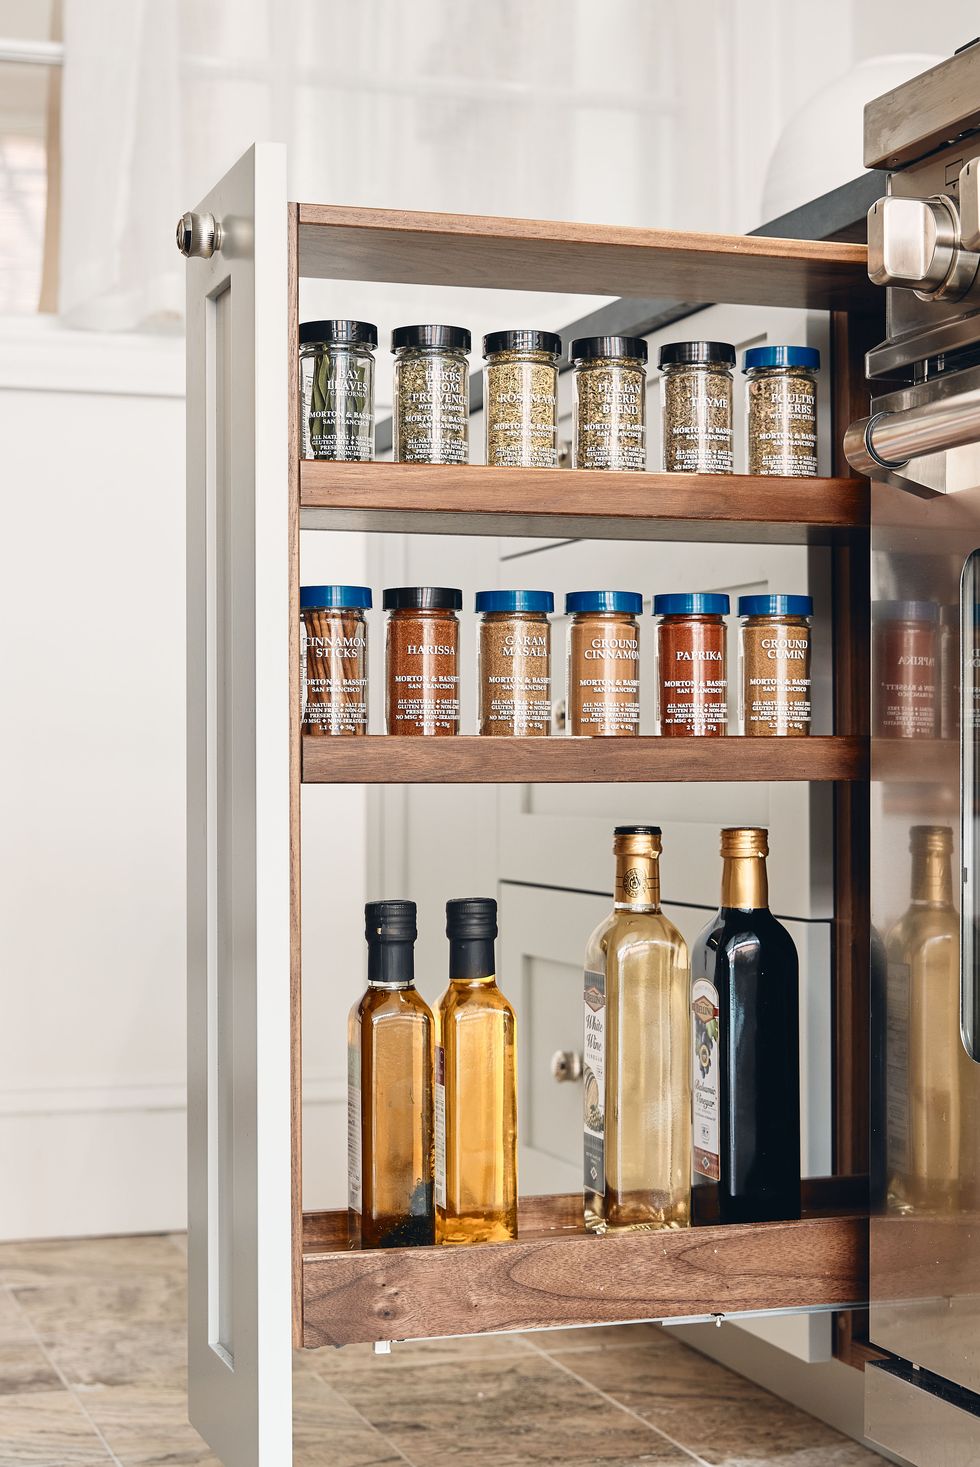 The Big Spice Rack: Add Room for More with Better Decor in the